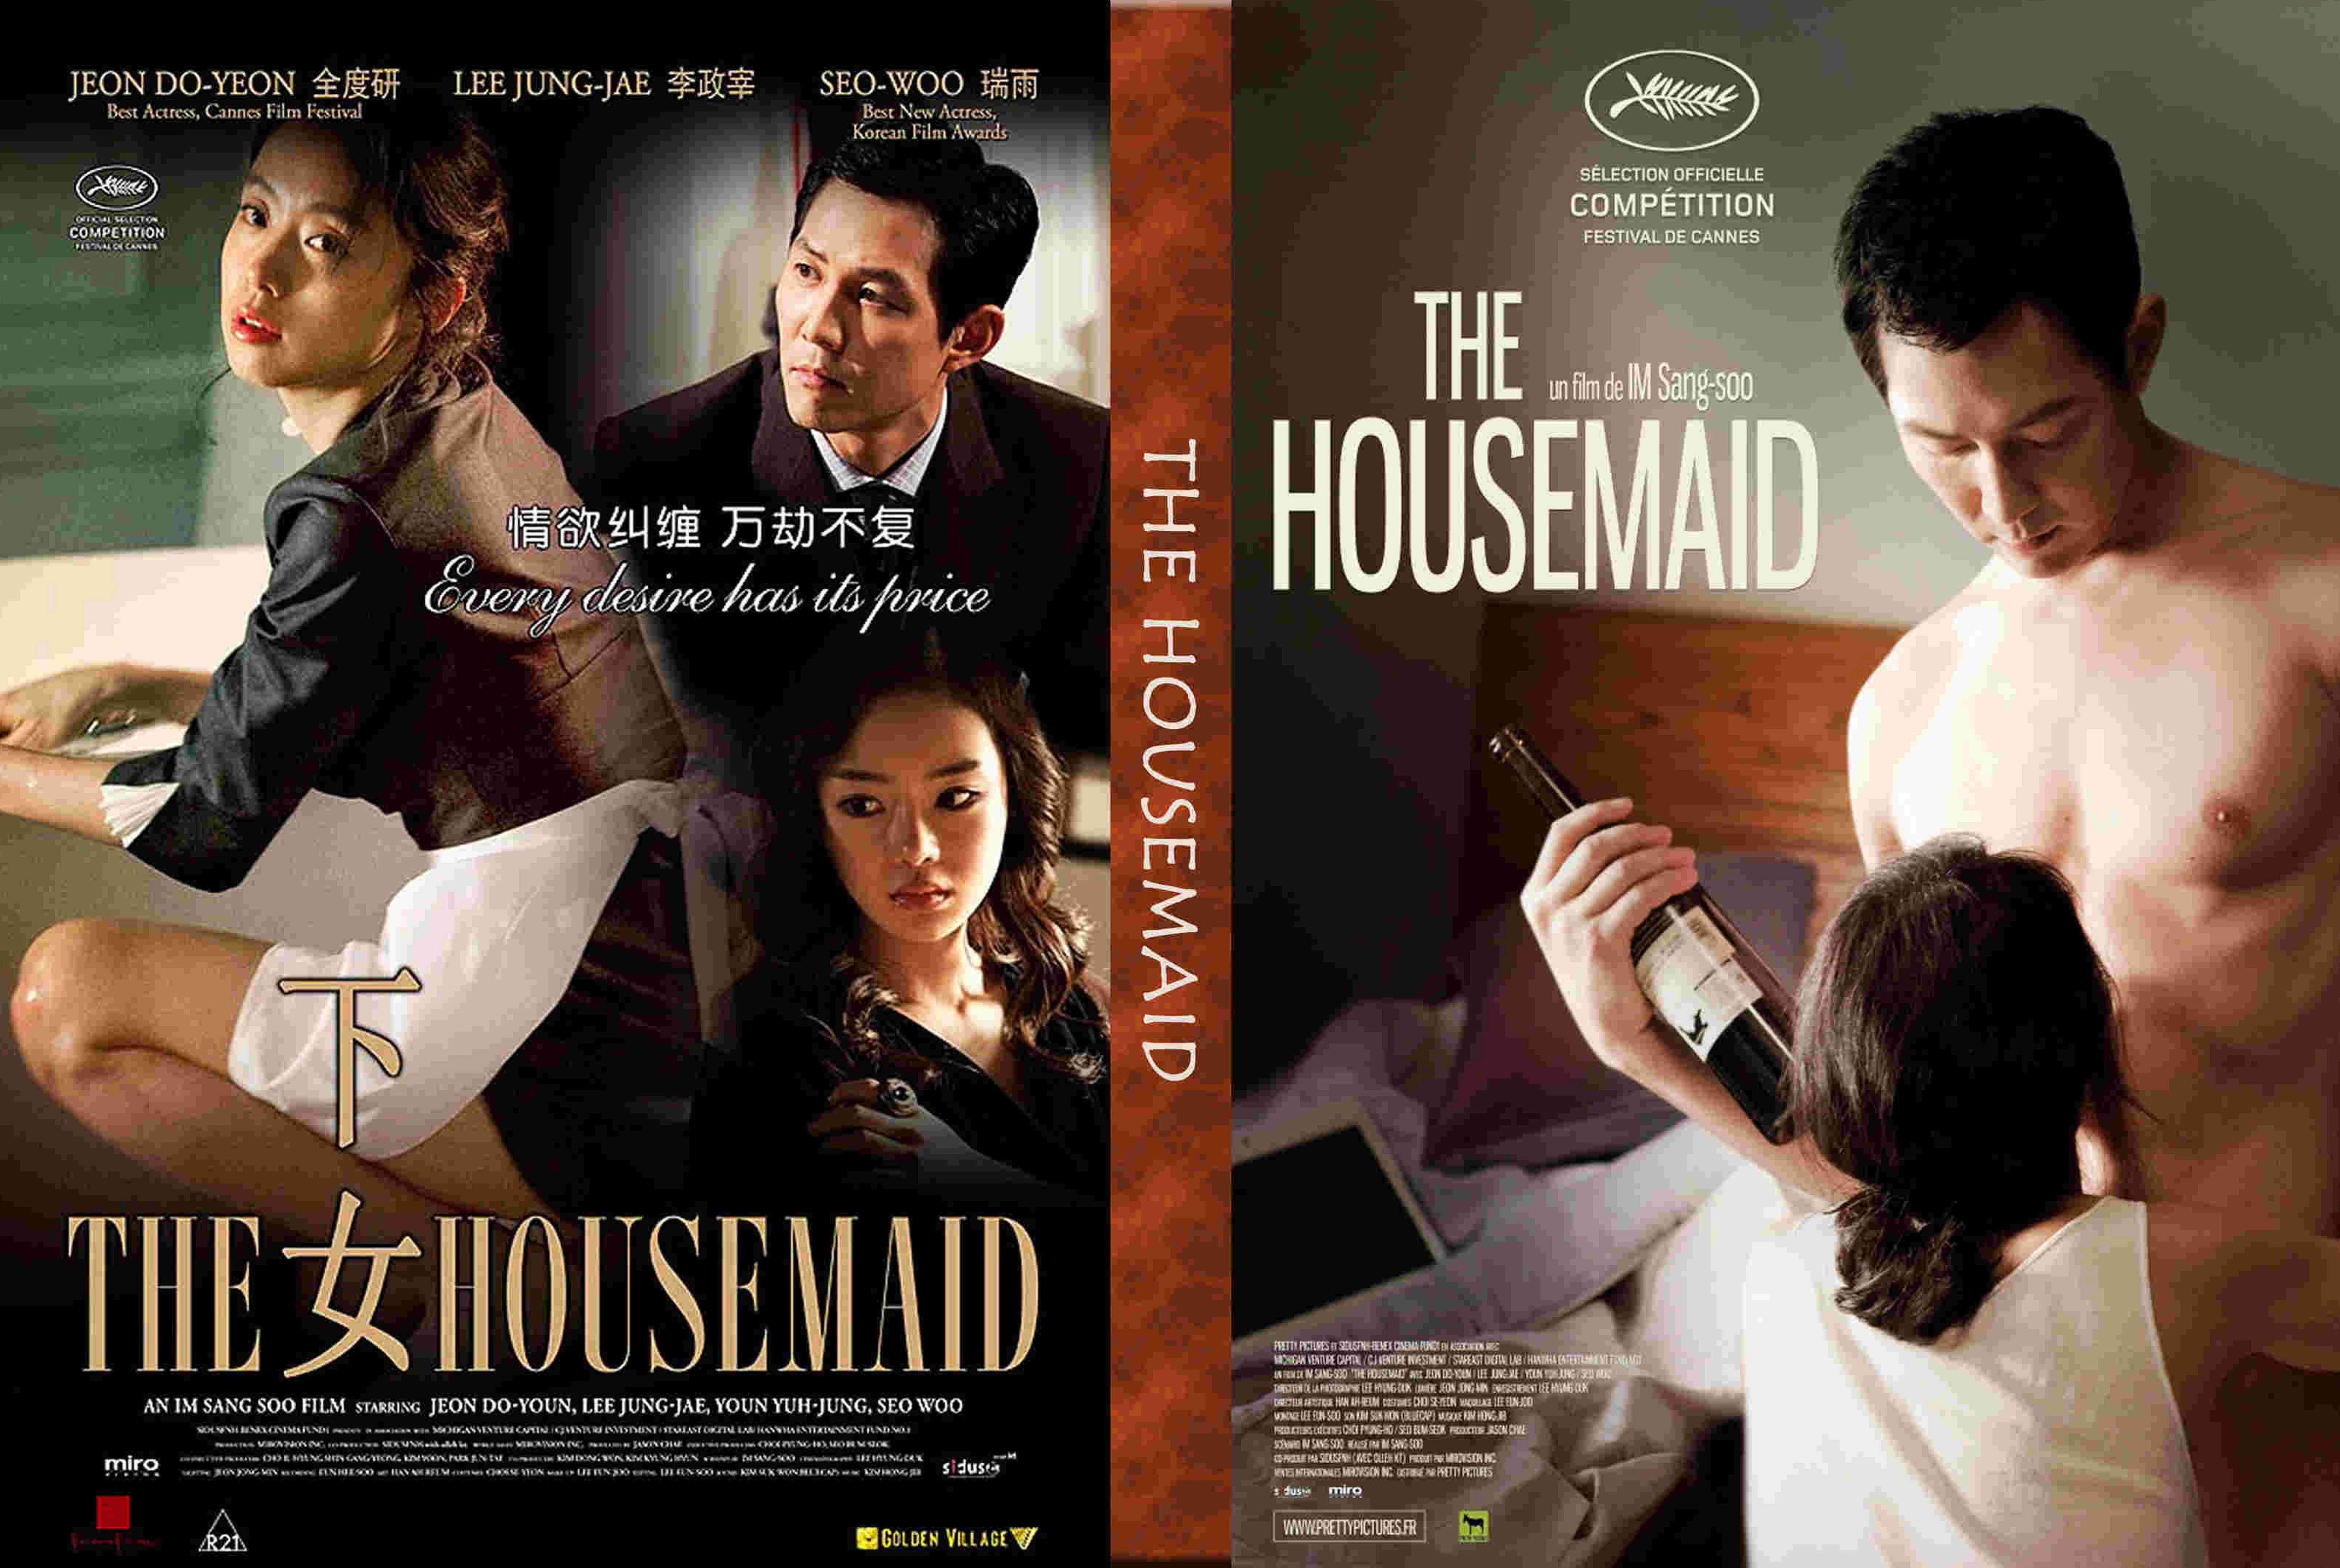 the housemaid 2010 dvdrip xvid-extratorrentrg english subtitles